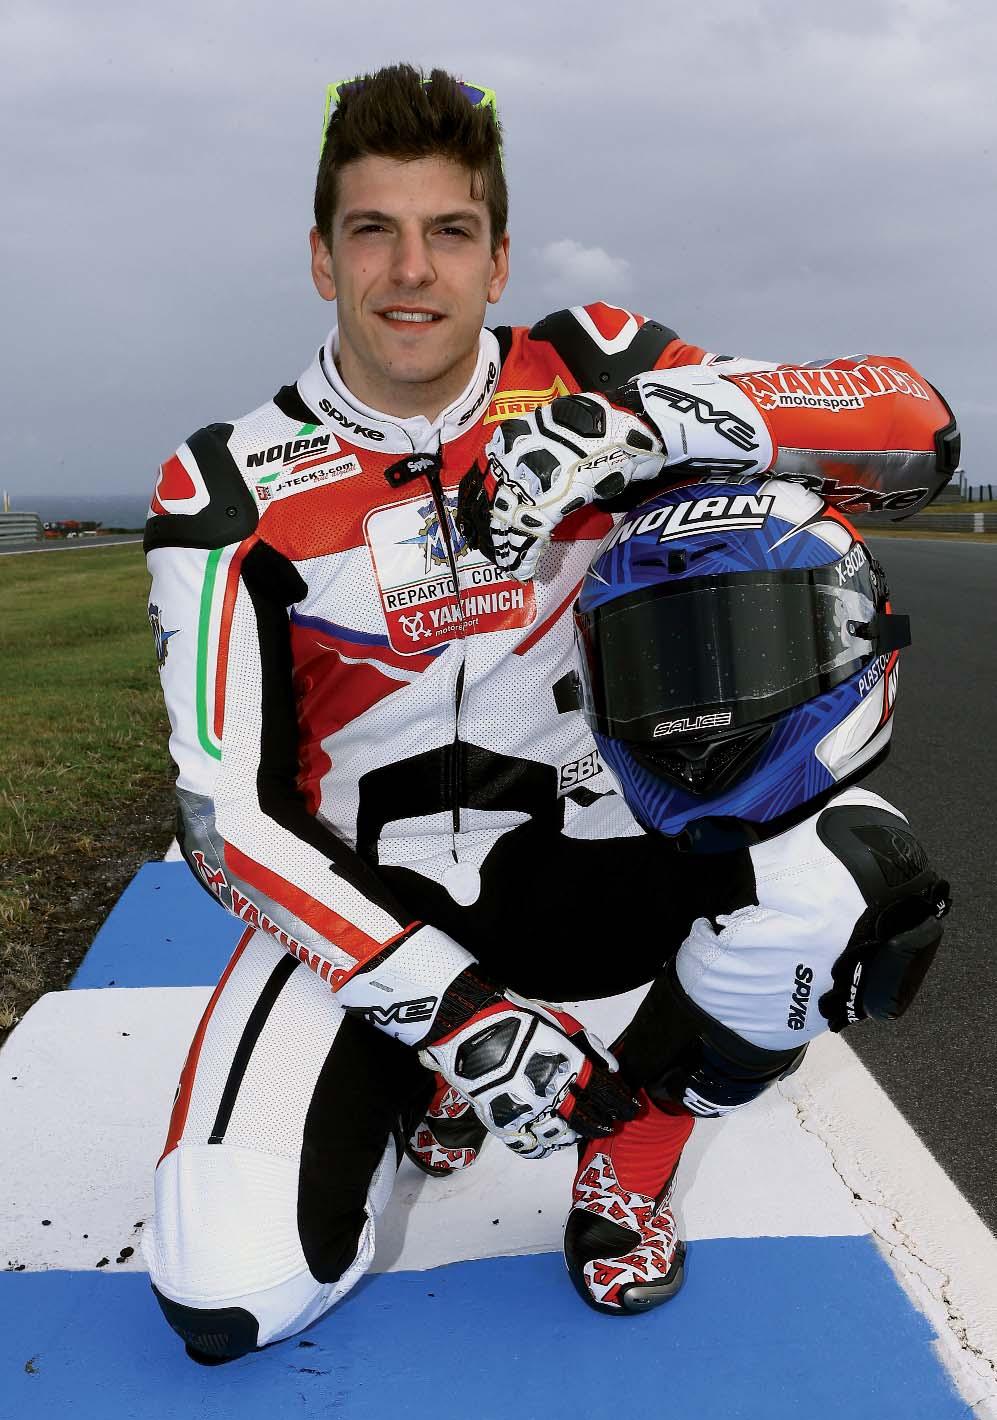 Claudio Corti (Superbike rider) He began competing seriously at the age of just 7.